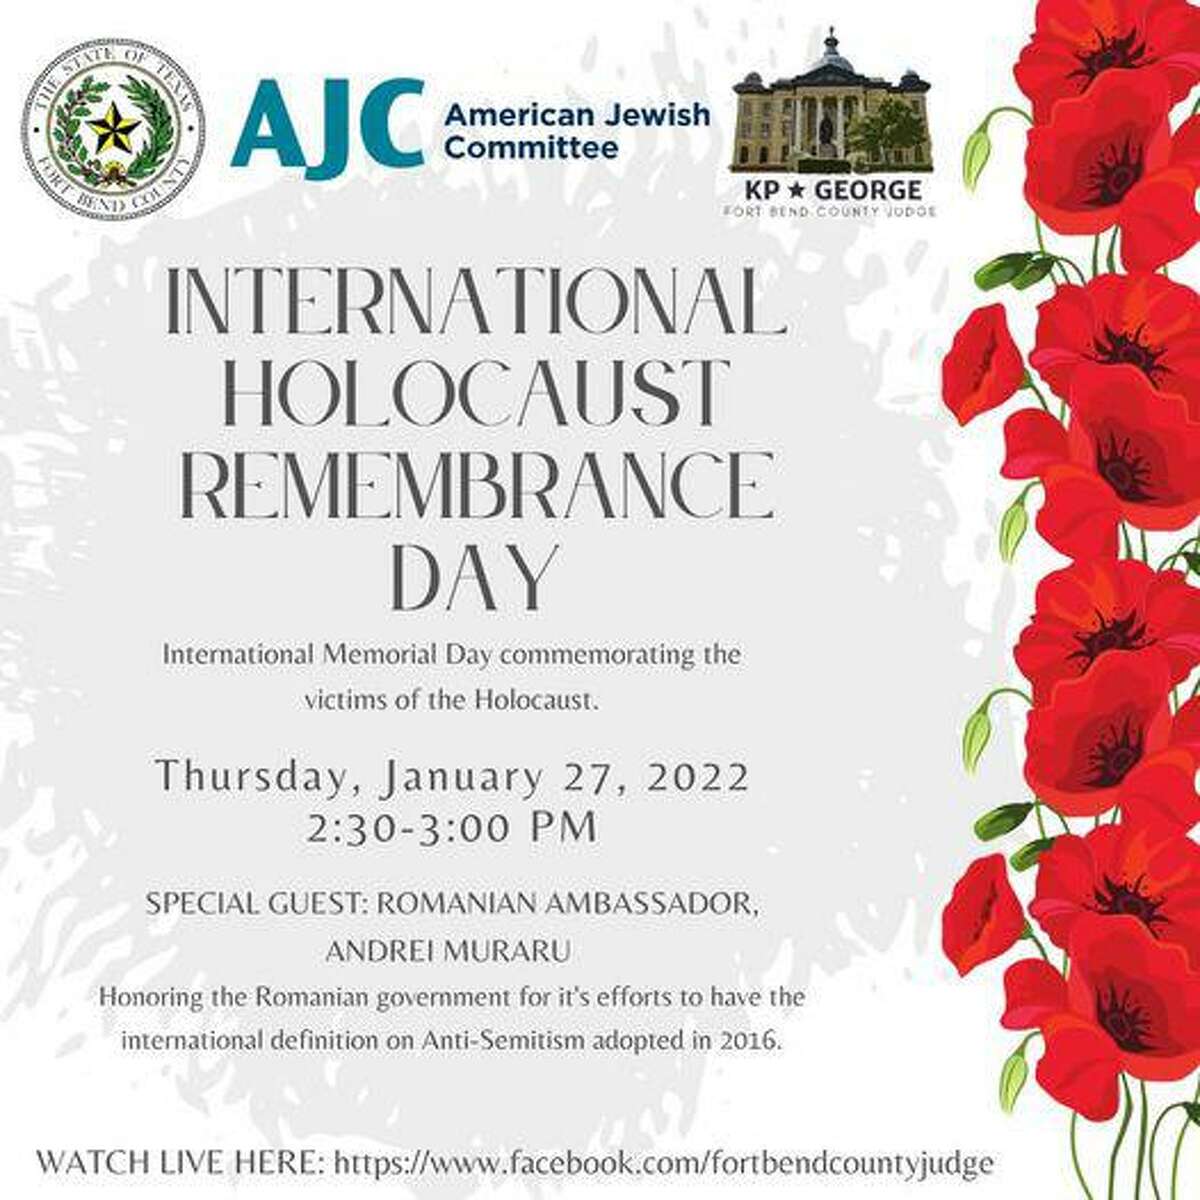 A virtual Holocaust remembrance service will be held on Thursday, Jan. 27, on the 77th anniversary of the liberation of Auschwitz.